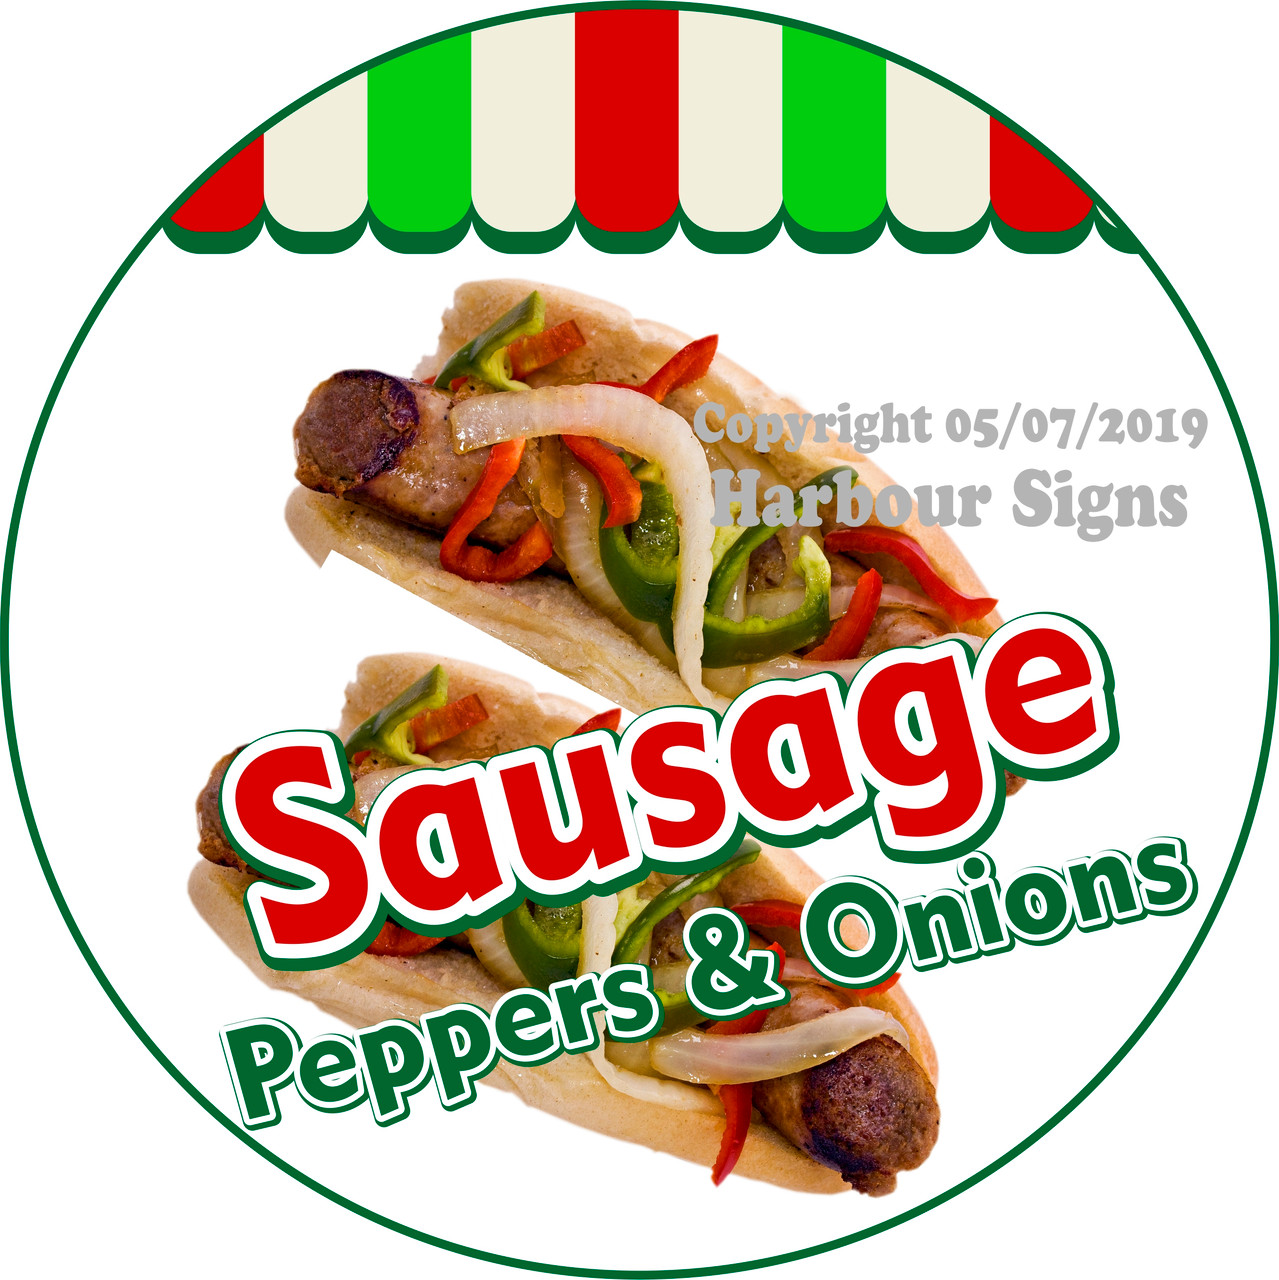 Italian Sausage Peppers Onions Sandwich Sub Concession Food Truck Menu Decal 14" 